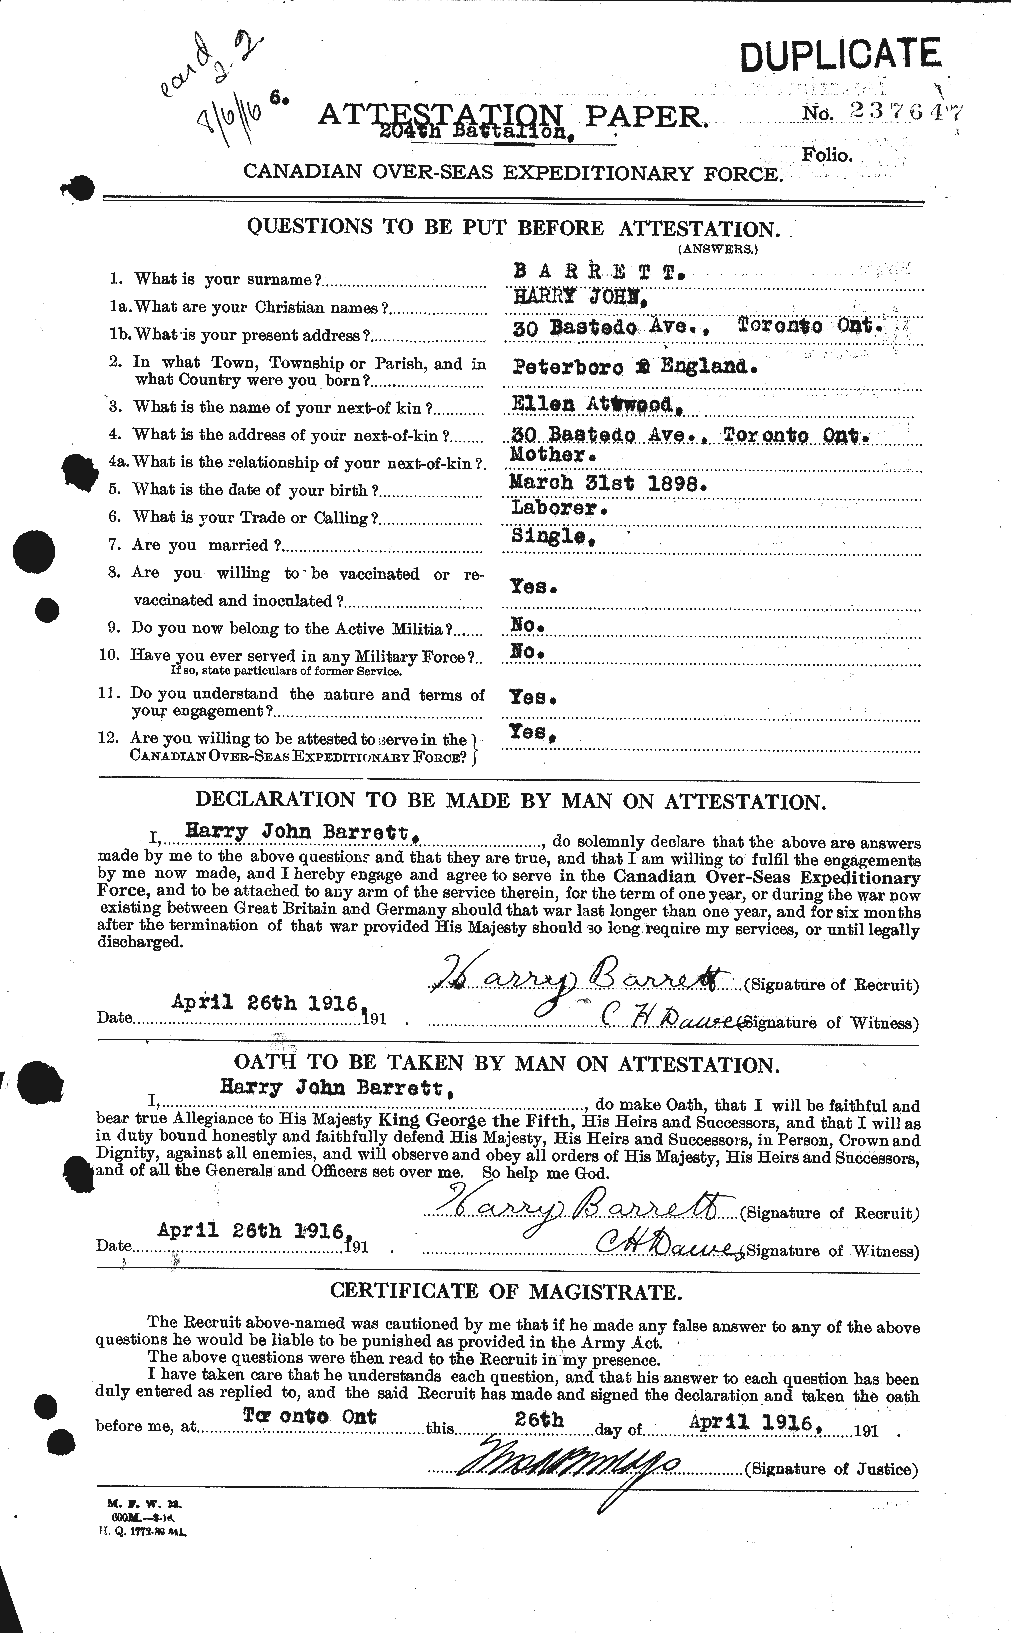 Personnel Records of the First World War - CEF 220290a